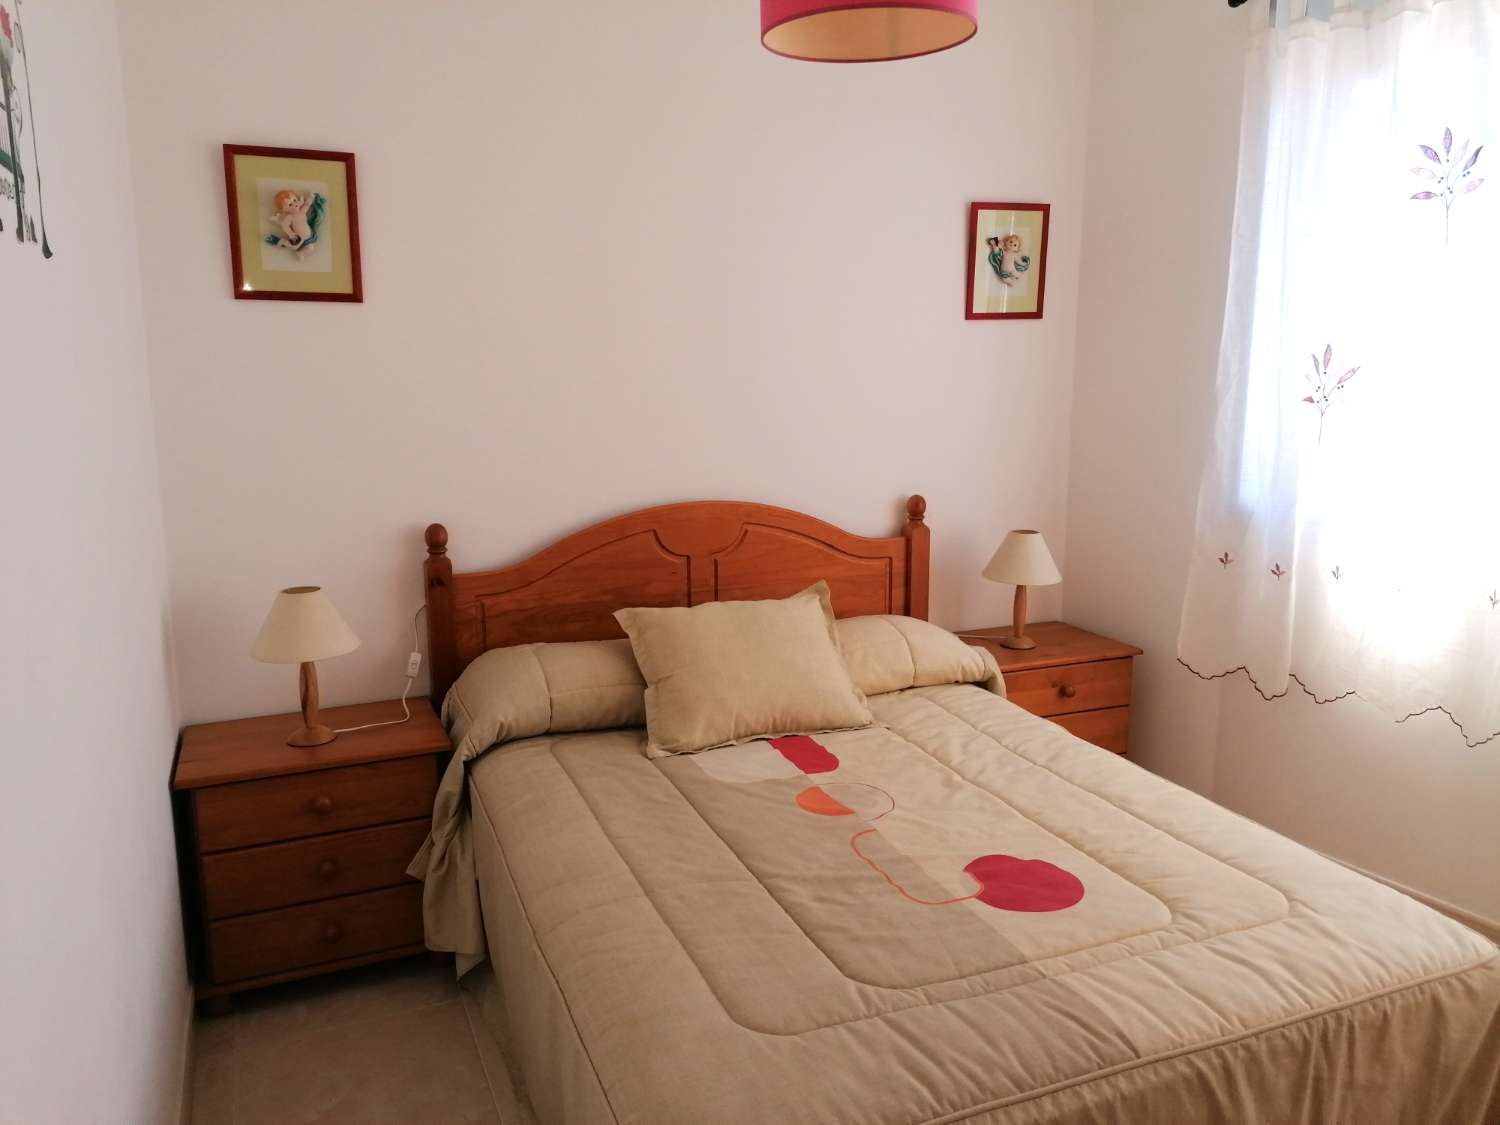 Poio: A7095: Raxo, apartment with terrace, sea views... to 200 mts. of the sea...